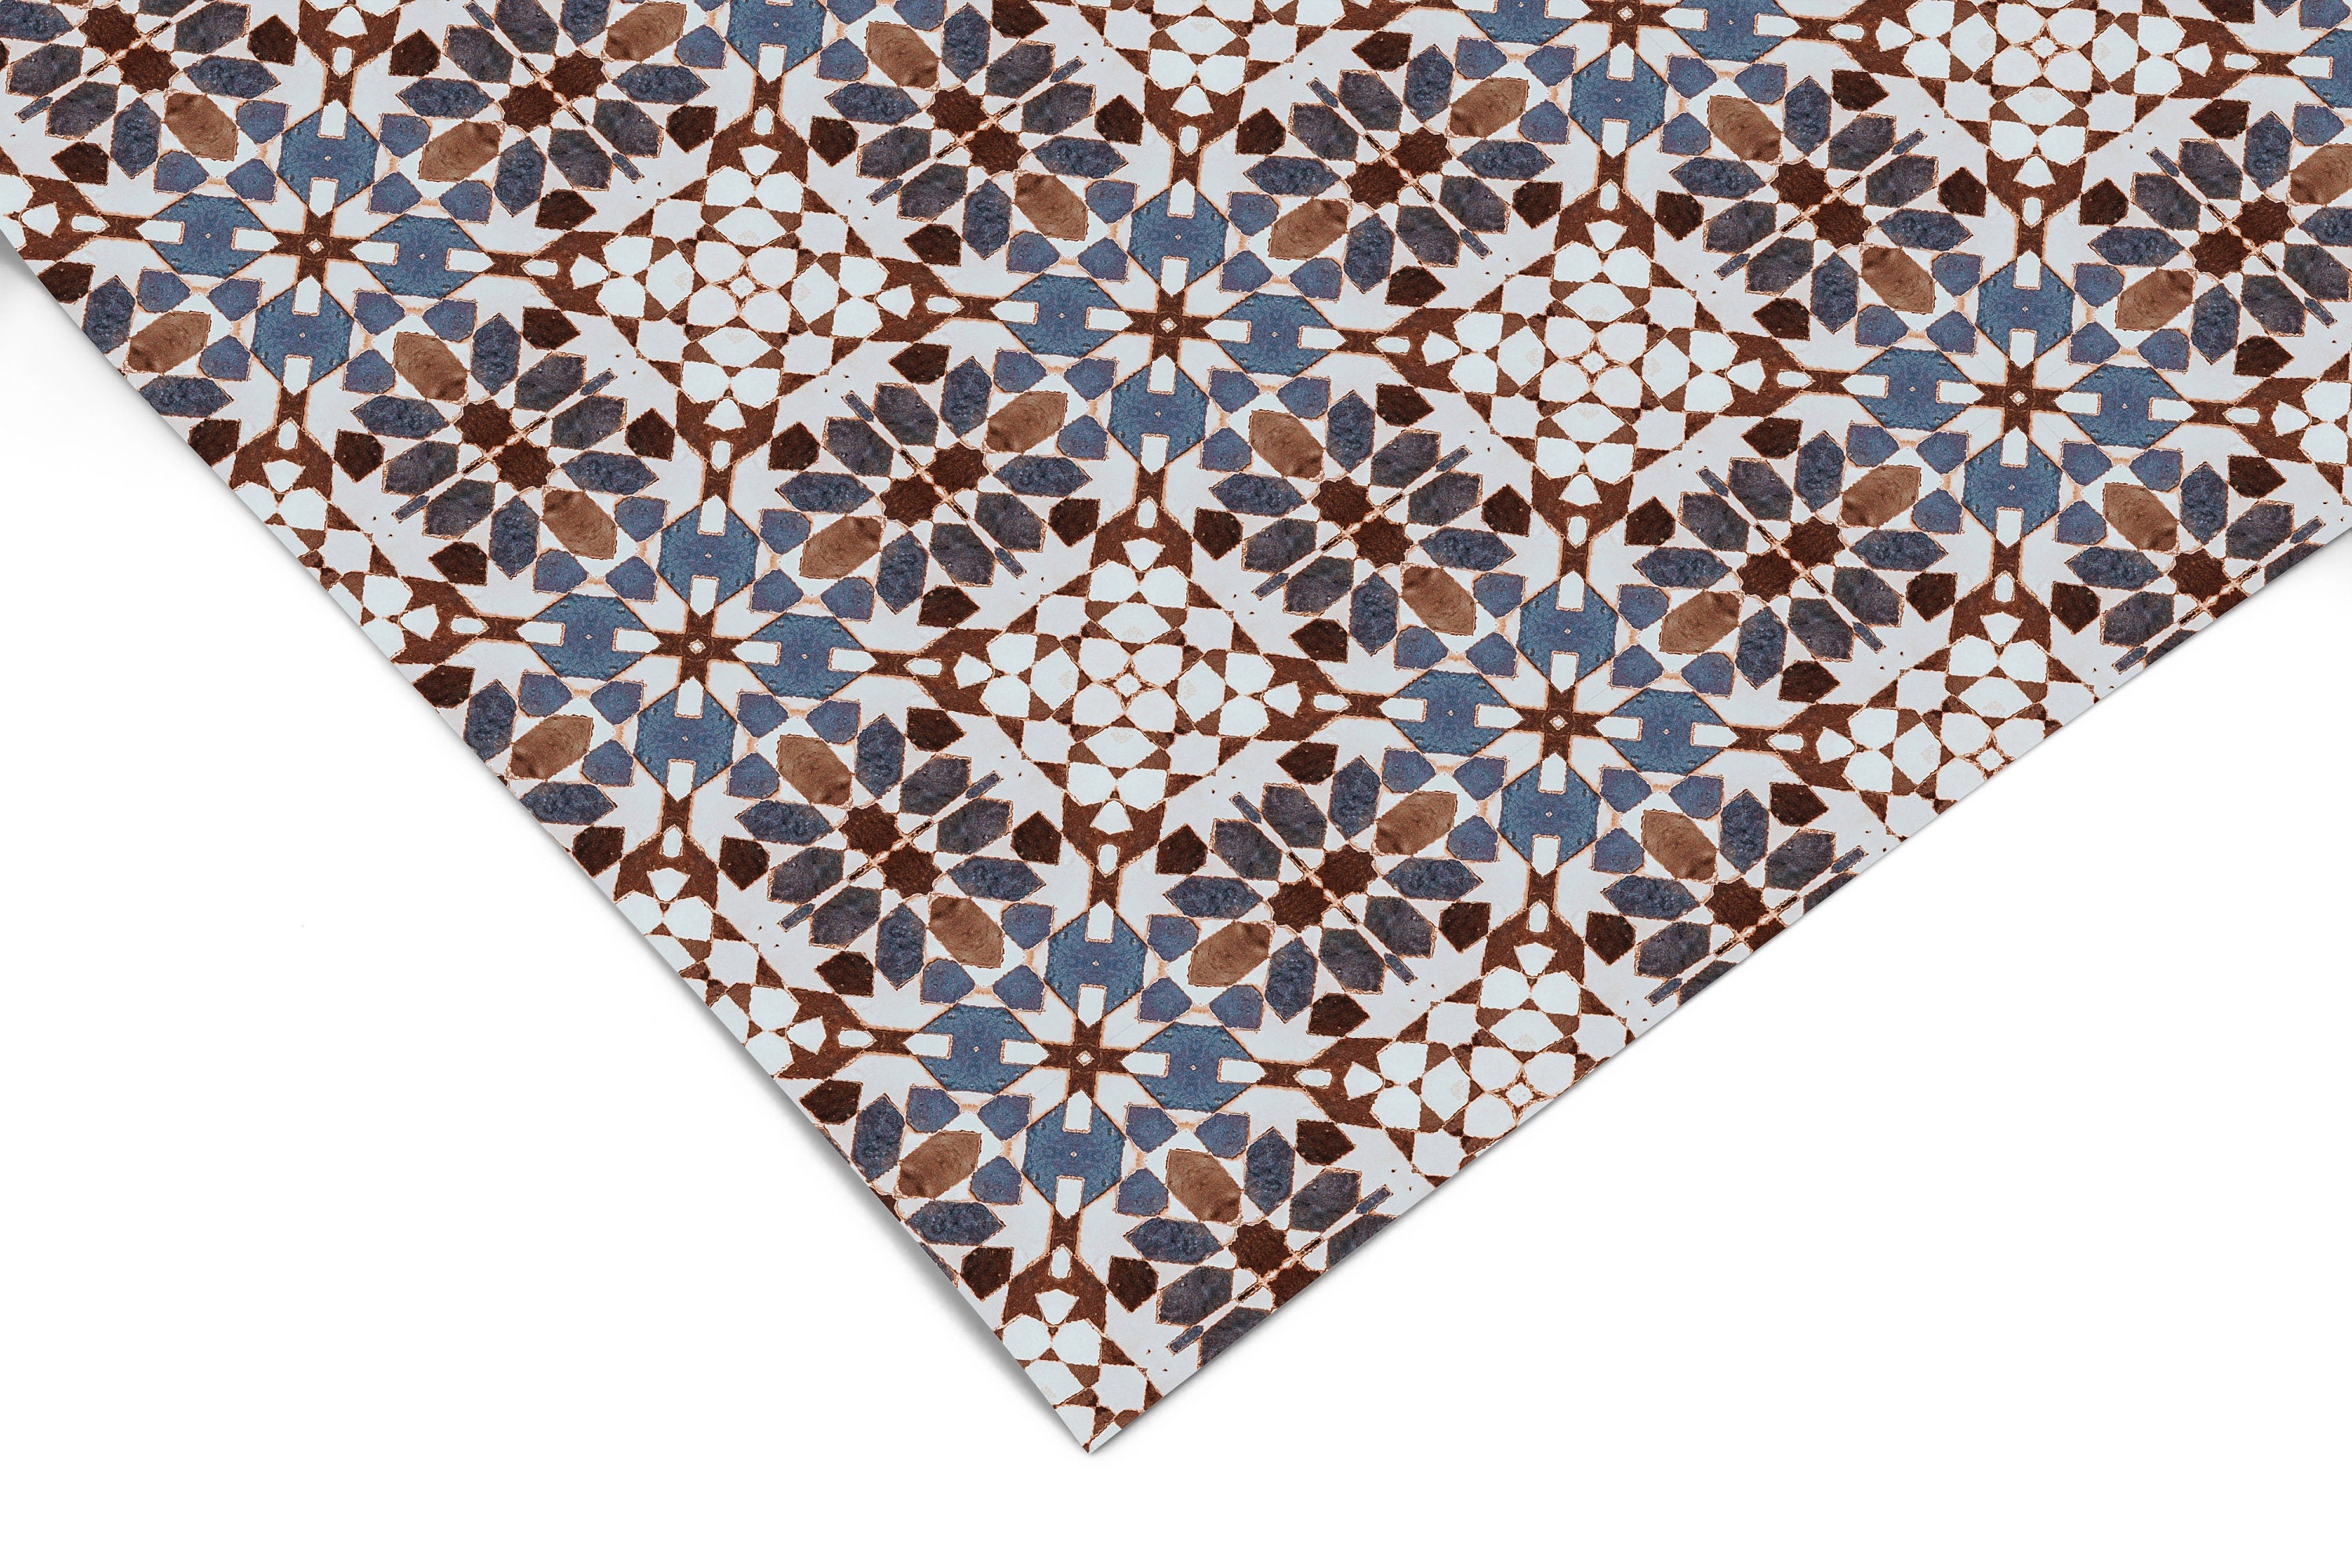 Moroccan Tile Pattern Contact Paper | Peel And Stick Wallpaper | Removable Wallpaper | Shelf Liner | Drawer Liner | Peel and Stick Paper 674 - JamesAndColors